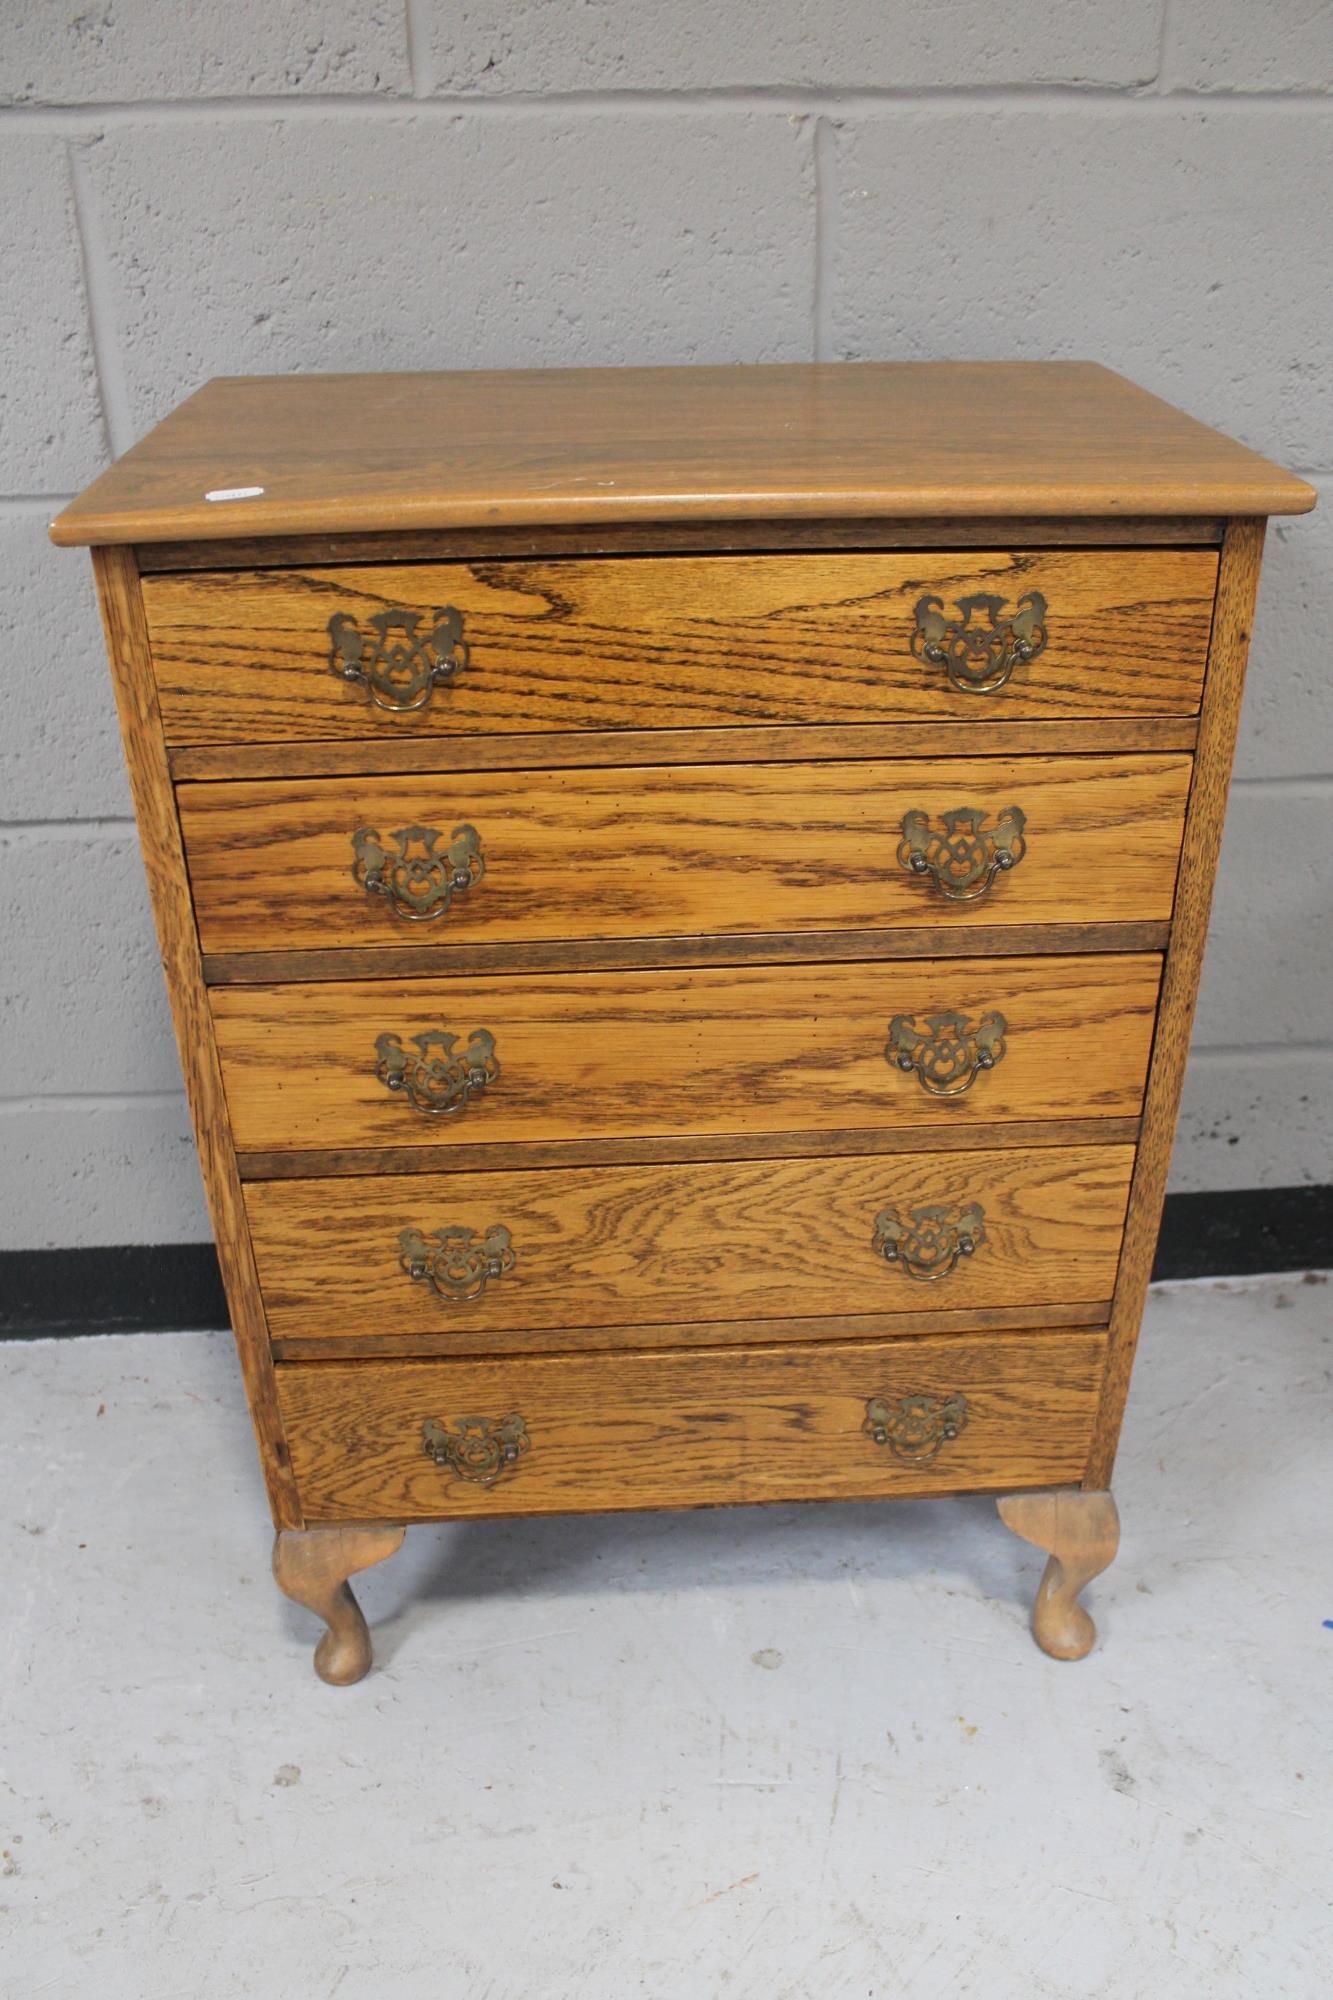 A 20th century oak five drawer chest